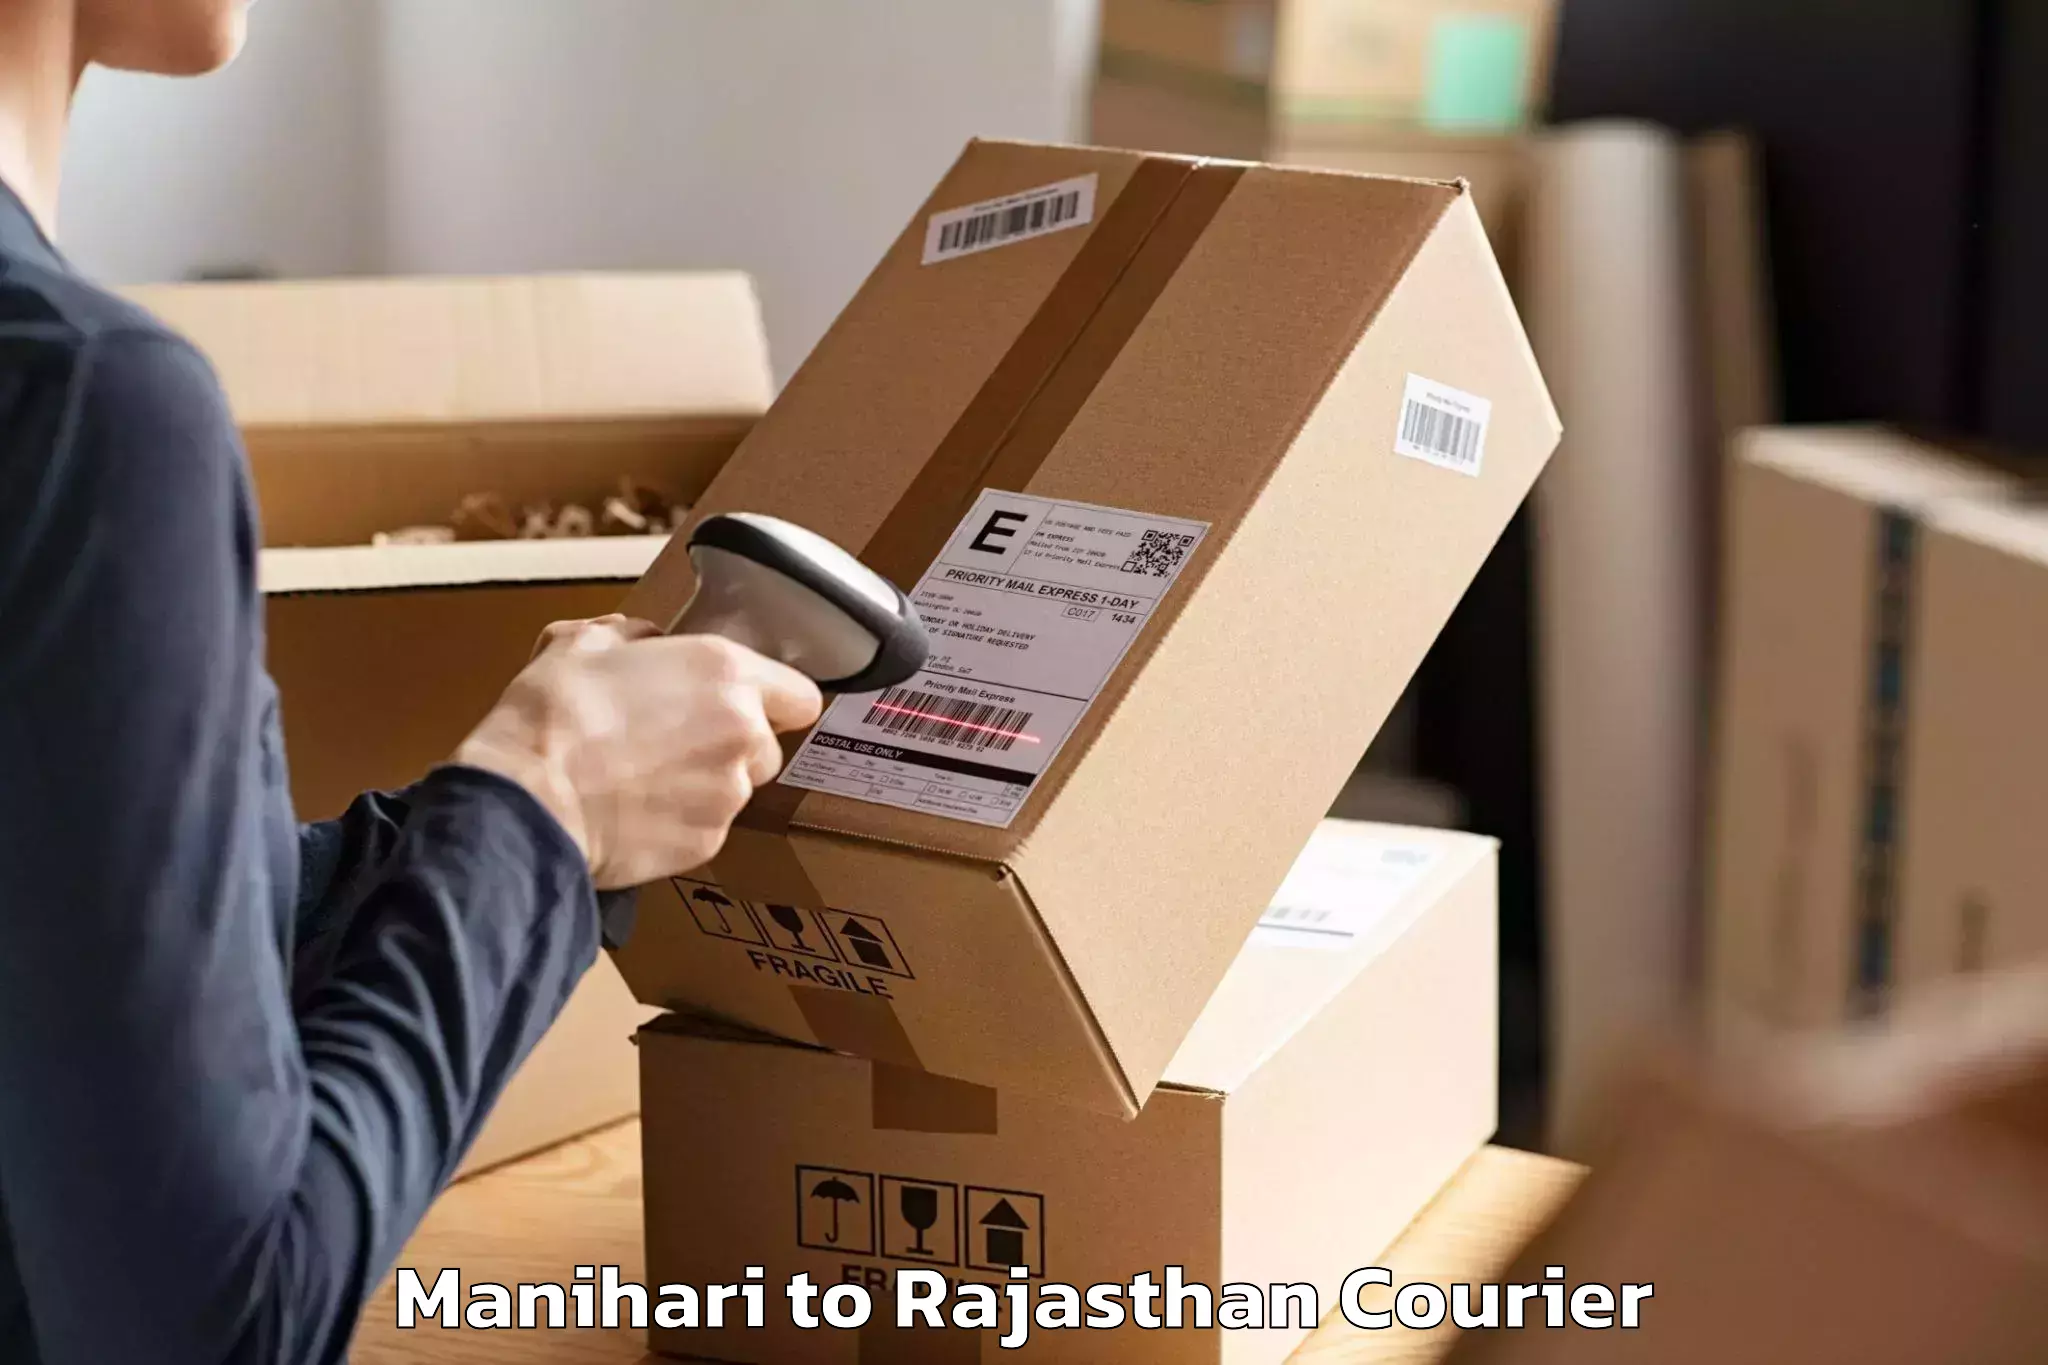 Moving and packing experts Manihari to Rajasthan